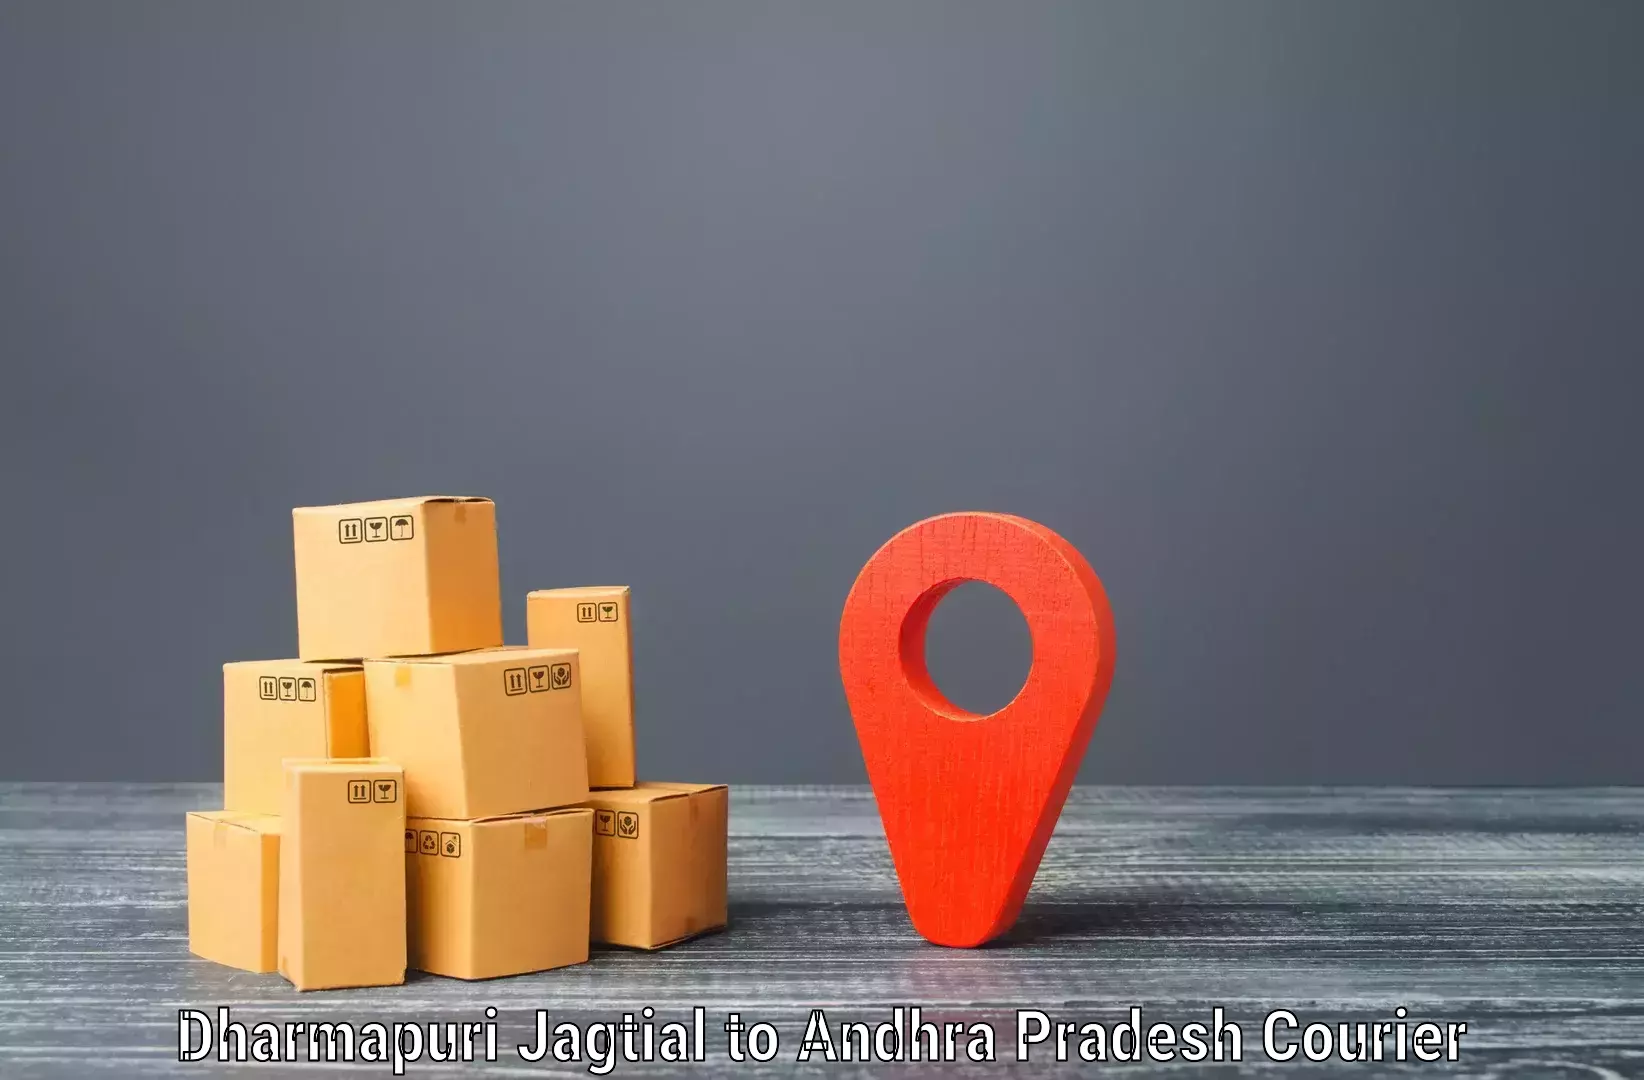 Short distance delivery in Dharmapuri Jagtial to Ongole